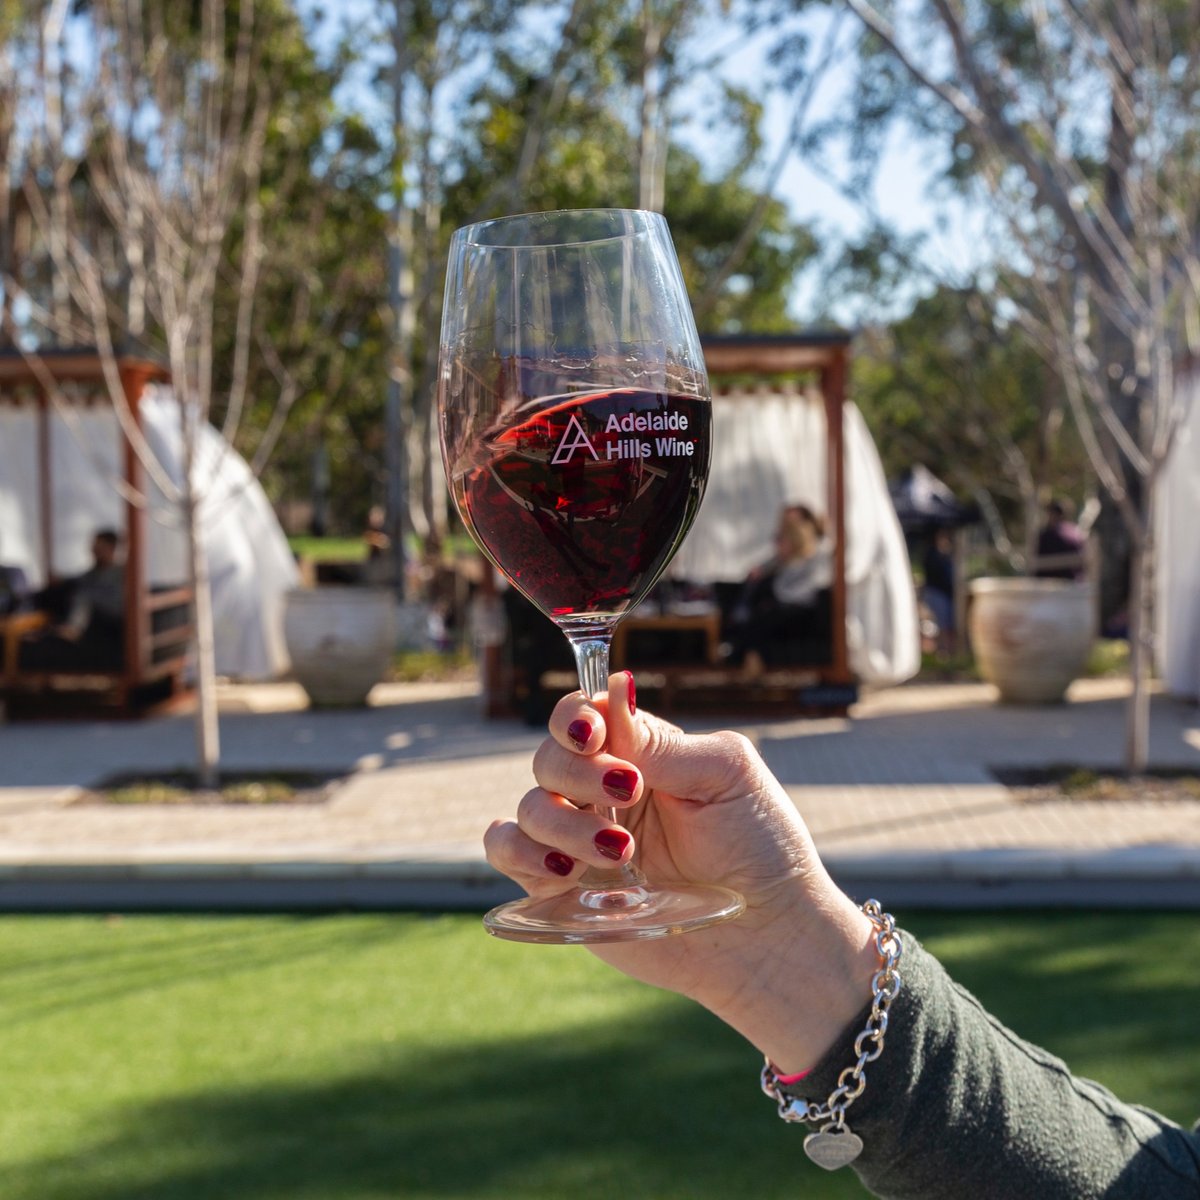 2 sleeps until the biggest weekend of the year up here! Our venues are polishing the glasses, putting the finishing touches on the menu's, prepping the lawns and getting the fire wood stacked high! 🍷🔥 adelaidehillswine.com.au/events/winter-… #winterreds23